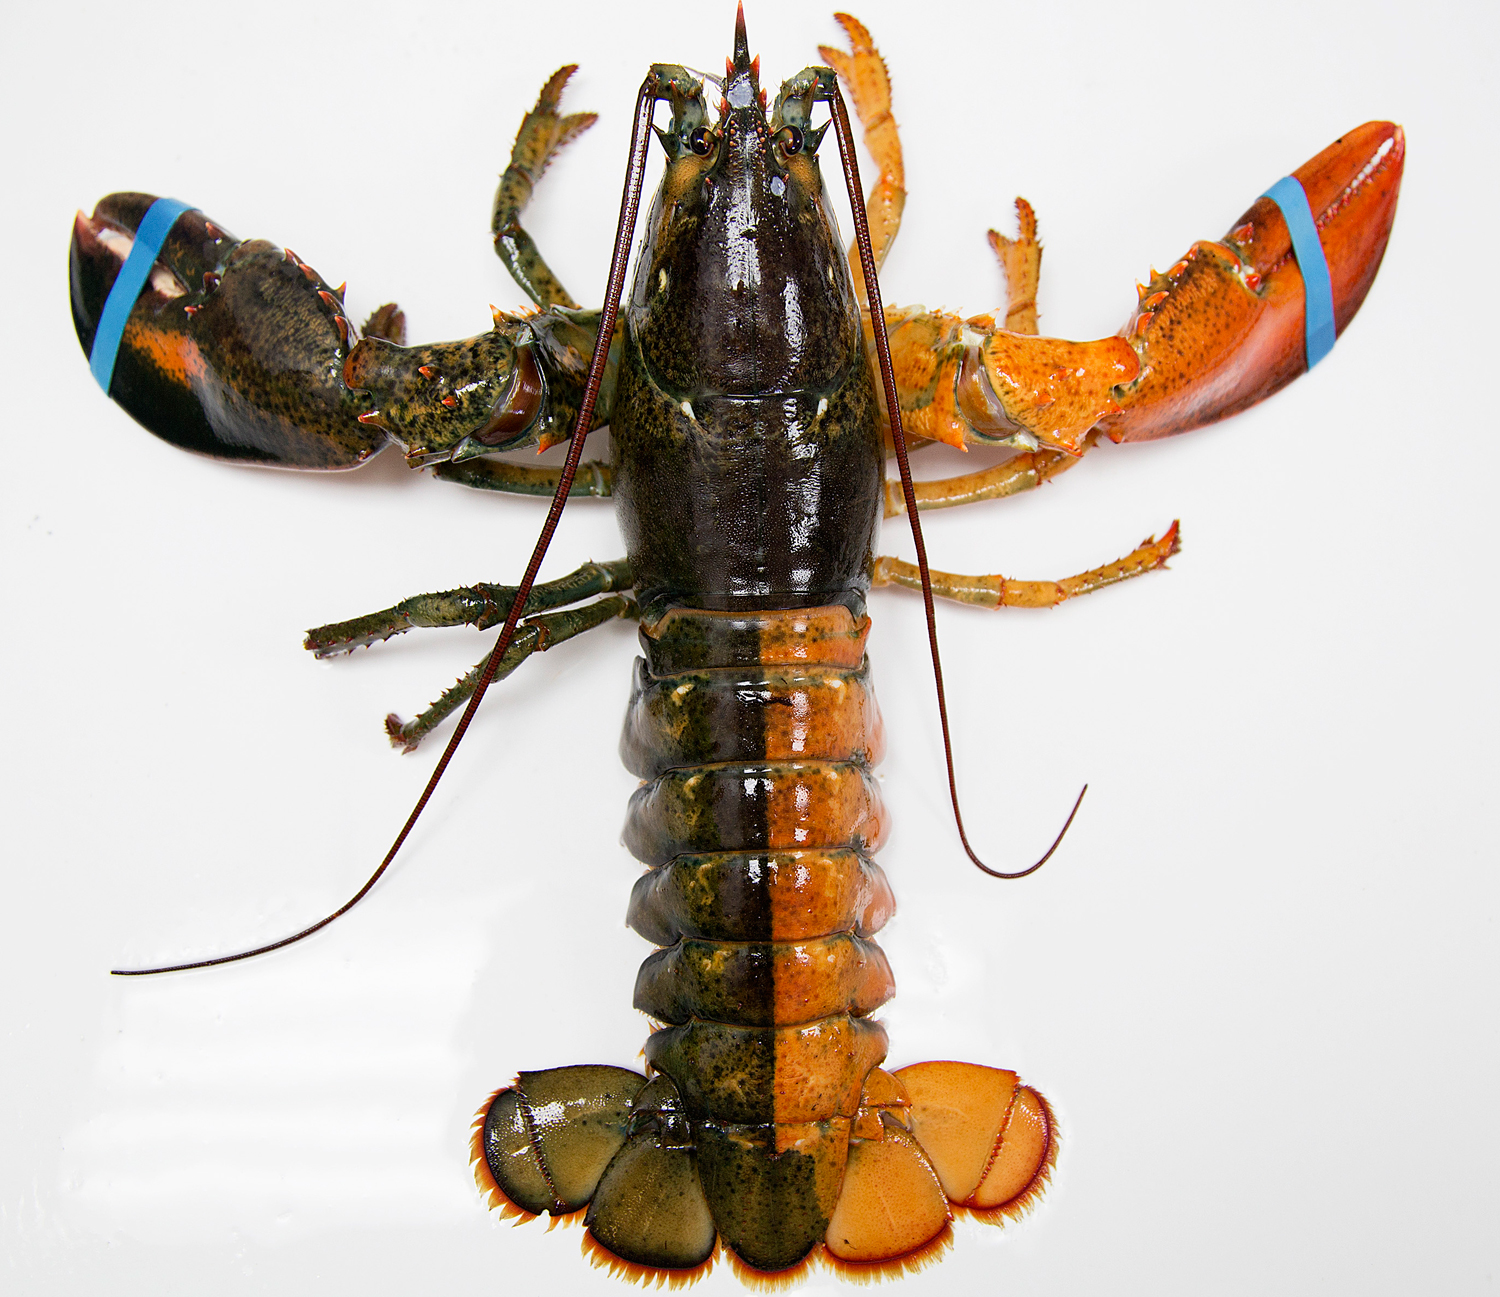 Blue Lobsters and 11 Interesting Lobster Facts